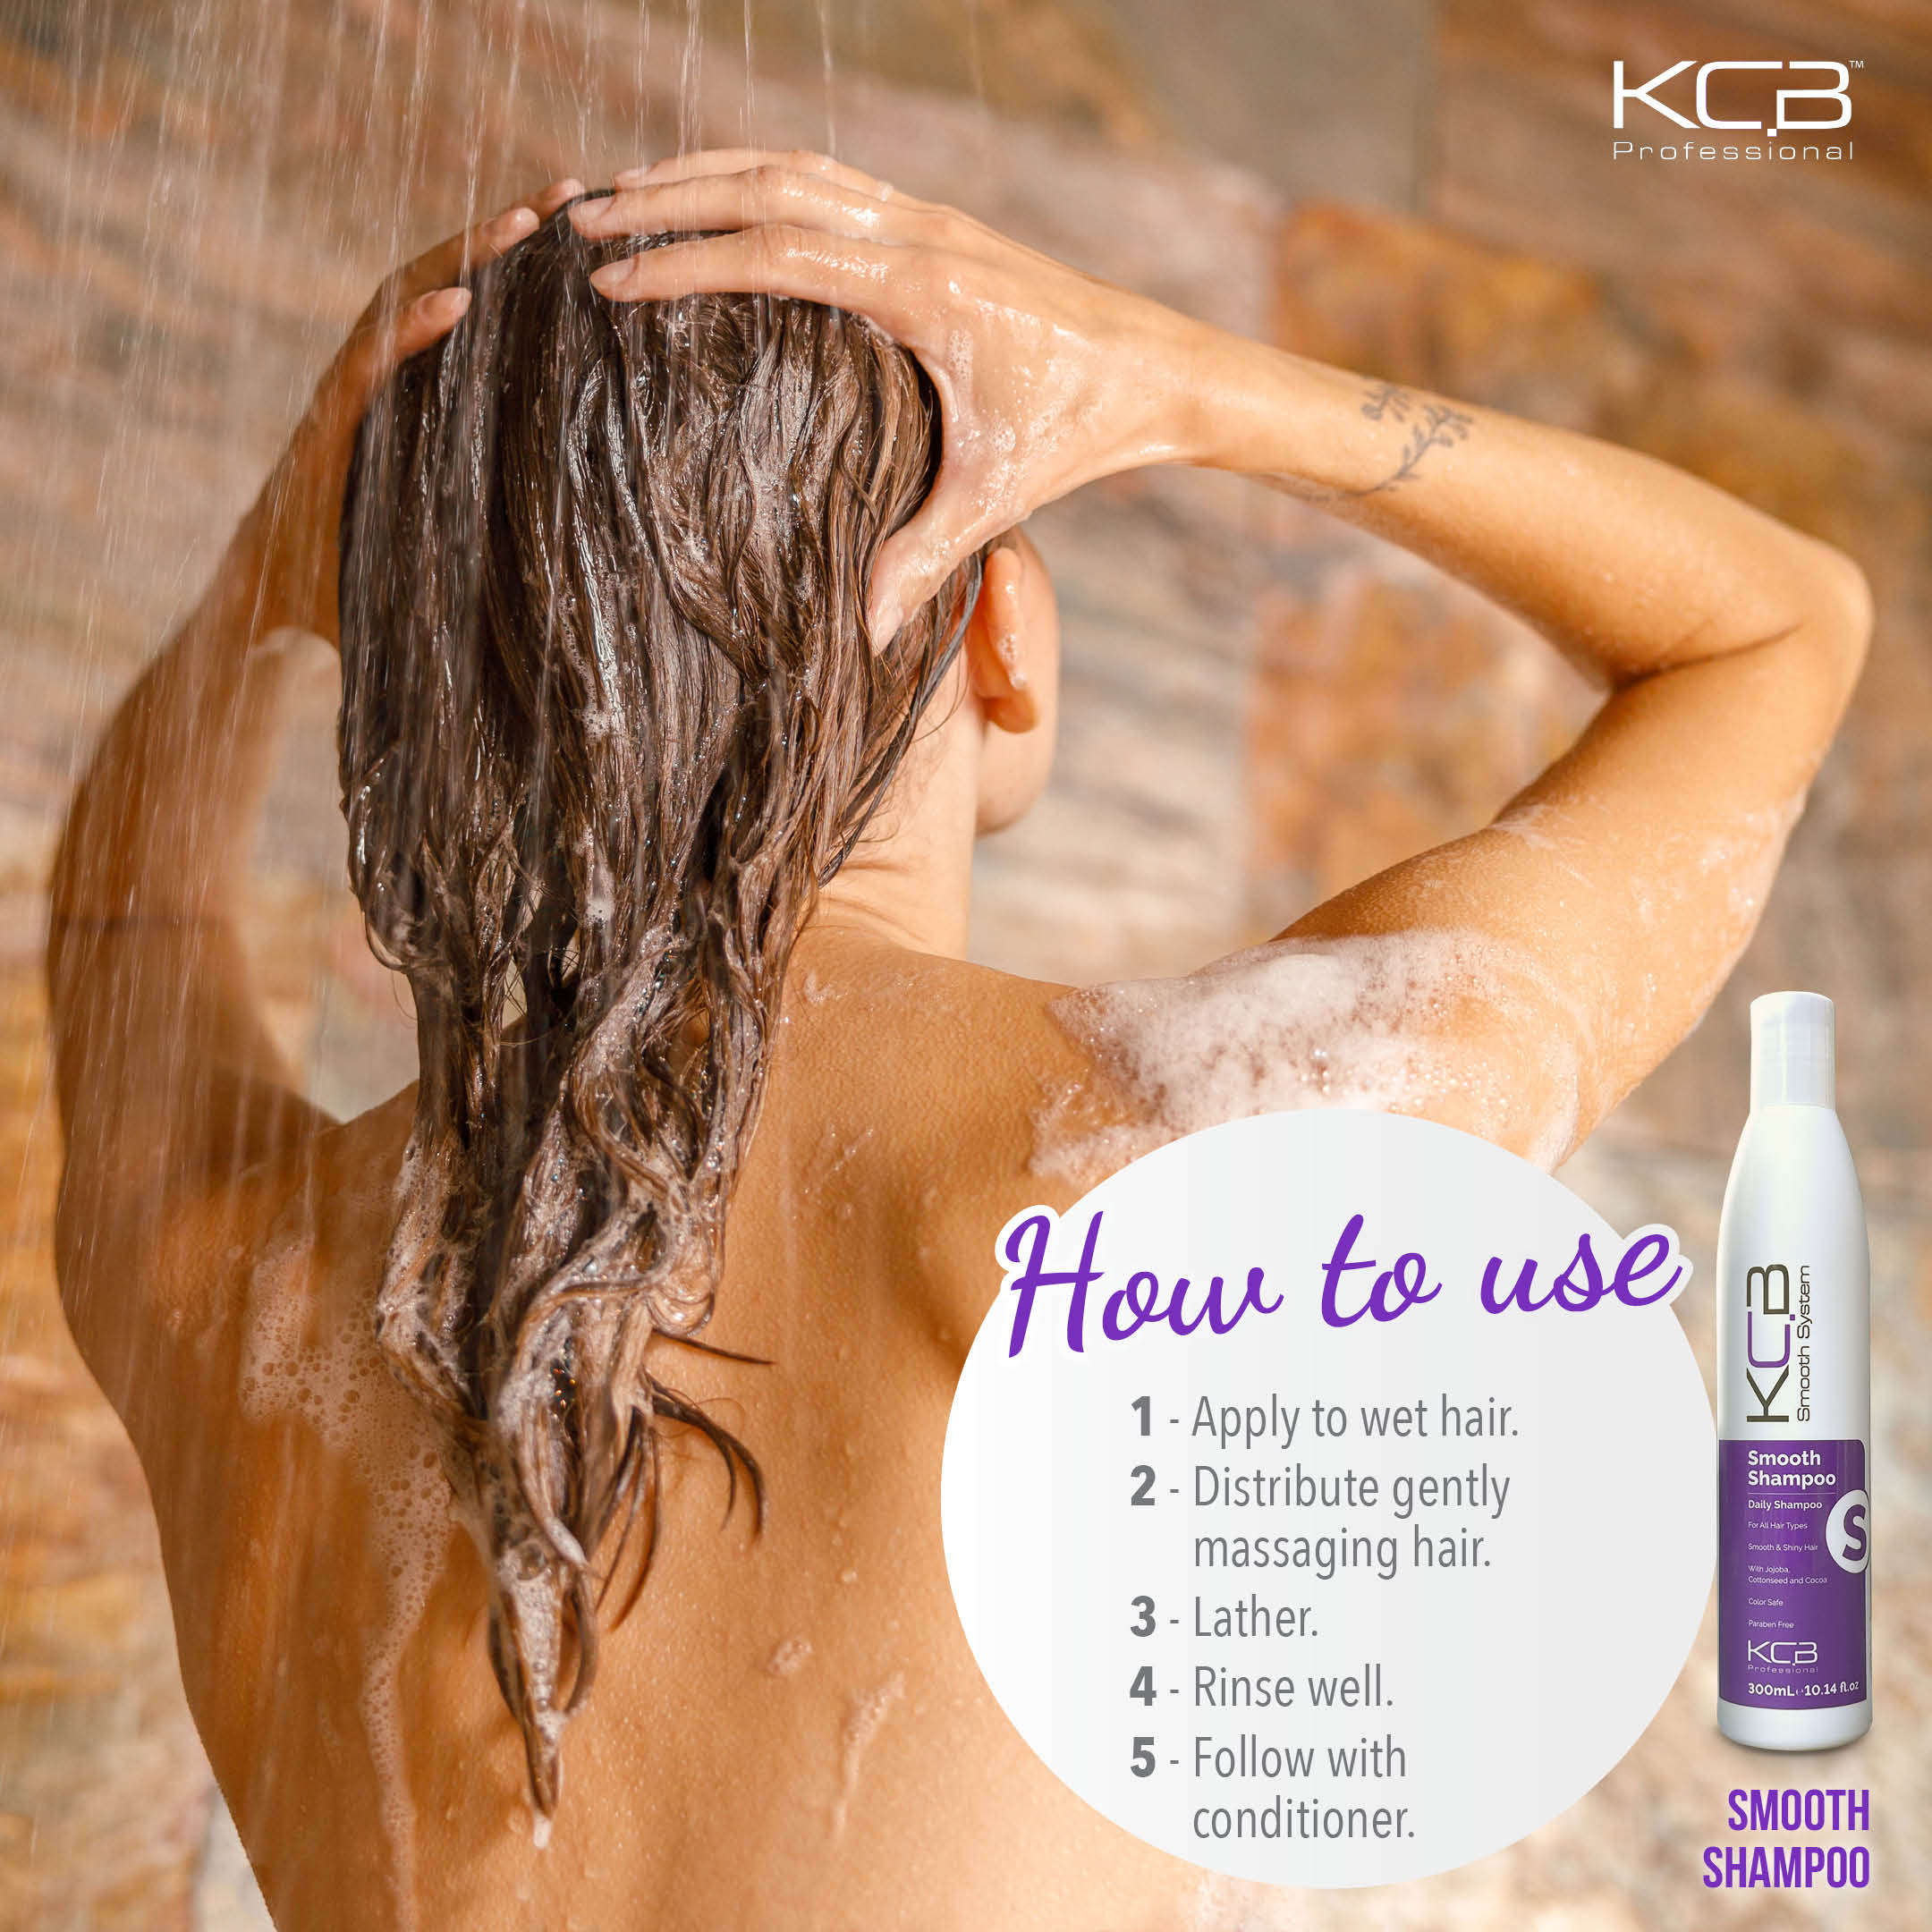 KCB Professional Smooth Shampoo for Smoothing and Hair Frizz Control. Cleansing, Softness, Manageability, All Hair Types, 10.14 Fl oz / 300ml. Enriched with Jojoba Oil, Cottonseed and Cocoa Butter.